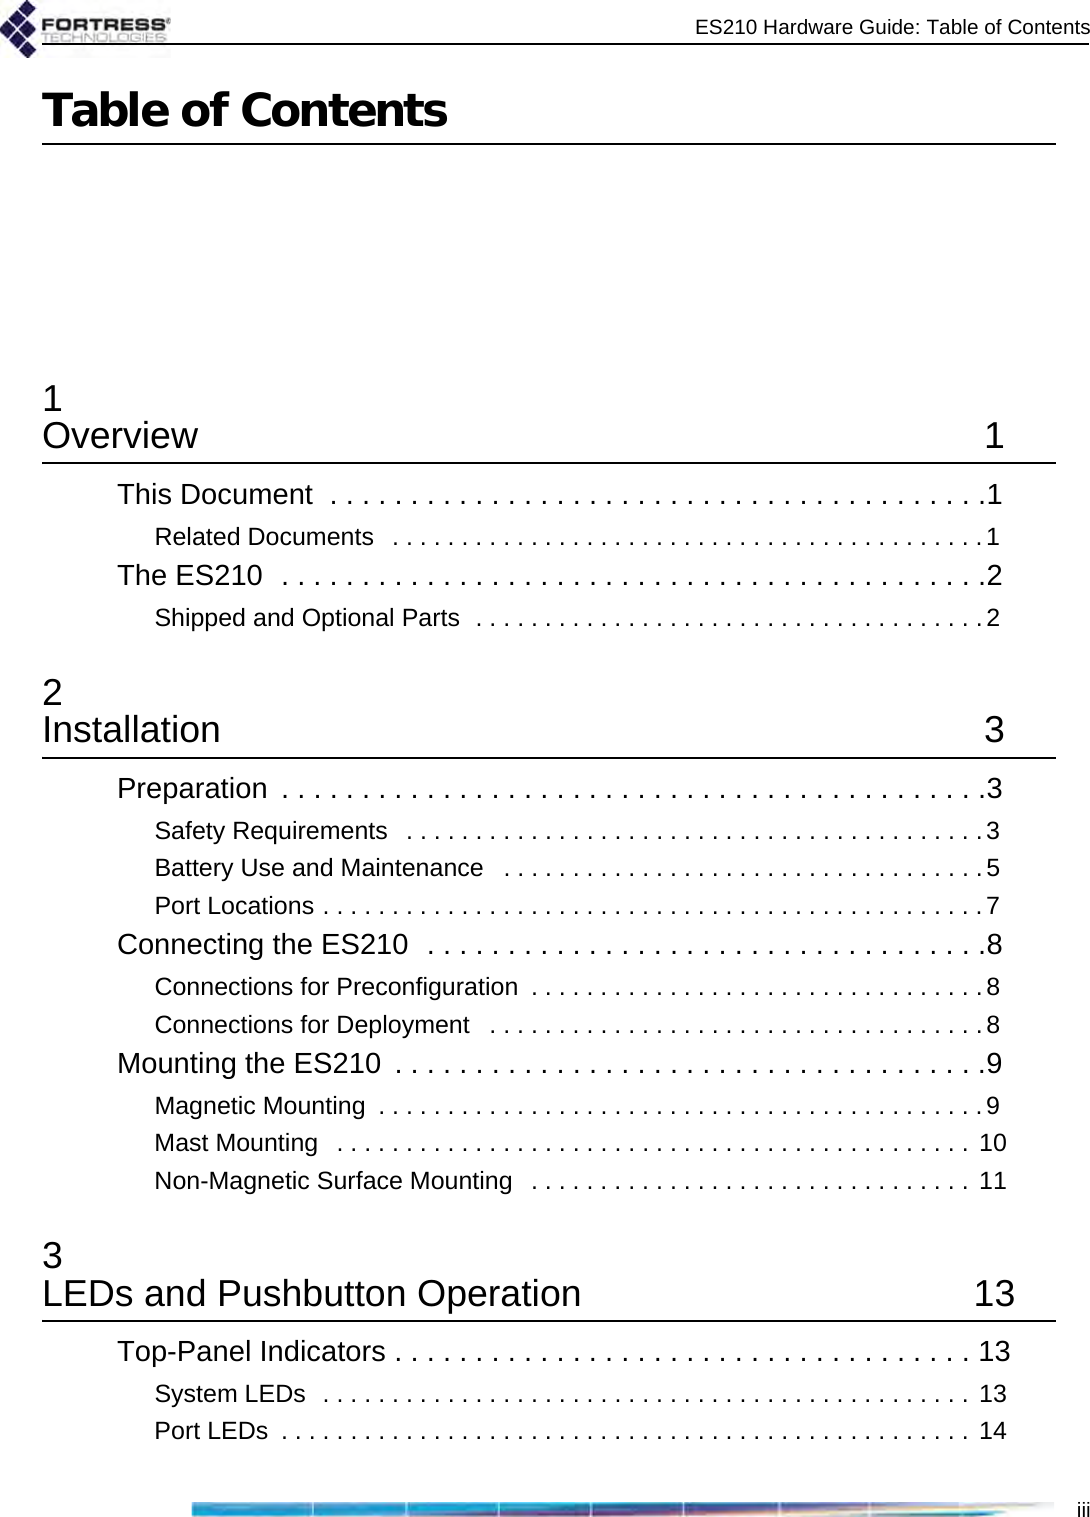 ES210 Hardware Guide: Table of ContentsiiiTable of Contents1Overview 1This Document  . . . . . . . . . . . . . . . . . . . . . . . . . . . . . . . . . . . . . . . . .1Related Documents   . . . . . . . . . . . . . . . . . . . . . . . . . . . . . . . . . . . . . . . . . . .1The ES210  . . . . . . . . . . . . . . . . . . . . . . . . . . . . . . . . . . . . . . . . . . . .2Shipped and Optional Parts  . . . . . . . . . . . . . . . . . . . . . . . . . . . . . . . . . . . . .22Installation 3Preparation  . . . . . . . . . . . . . . . . . . . . . . . . . . . . . . . . . . . . . . . . . . . .3Safety Requirements   . . . . . . . . . . . . . . . . . . . . . . . . . . . . . . . . . . . . . . . . . .3Battery Use and Maintenance   . . . . . . . . . . . . . . . . . . . . . . . . . . . . . . . . . . .5Port Locations . . . . . . . . . . . . . . . . . . . . . . . . . . . . . . . . . . . . . . . . . . . . . . . .7Connecting the ES210  . . . . . . . . . . . . . . . . . . . . . . . . . . . . . . . . . . .8Connections for Preconfiguration  . . . . . . . . . . . . . . . . . . . . . . . . . . . . . . . . . 8Connections for Deployment   . . . . . . . . . . . . . . . . . . . . . . . . . . . . . . . . . . . .8Mounting the ES210  . . . . . . . . . . . . . . . . . . . . . . . . . . . . . . . . . . . . .9Magnetic Mounting  . . . . . . . . . . . . . . . . . . . . . . . . . . . . . . . . . . . . . . . . . . . .9Mast Mounting   . . . . . . . . . . . . . . . . . . . . . . . . . . . . . . . . . . . . . . . . . . . . . . 10Non-Magnetic Surface Mounting   . . . . . . . . . . . . . . . . . . . . . . . . . . . . . . . . 113LEDs and Pushbutton Operation  13Top-Panel Indicators . . . . . . . . . . . . . . . . . . . . . . . . . . . . . . . . . . . . 13System LEDs  . . . . . . . . . . . . . . . . . . . . . . . . . . . . . . . . . . . . . . . . . . . . . . . 13Port LEDs  . . . . . . . . . . . . . . . . . . . . . . . . . . . . . . . . . . . . . . . . . . . . . . . . . . 14